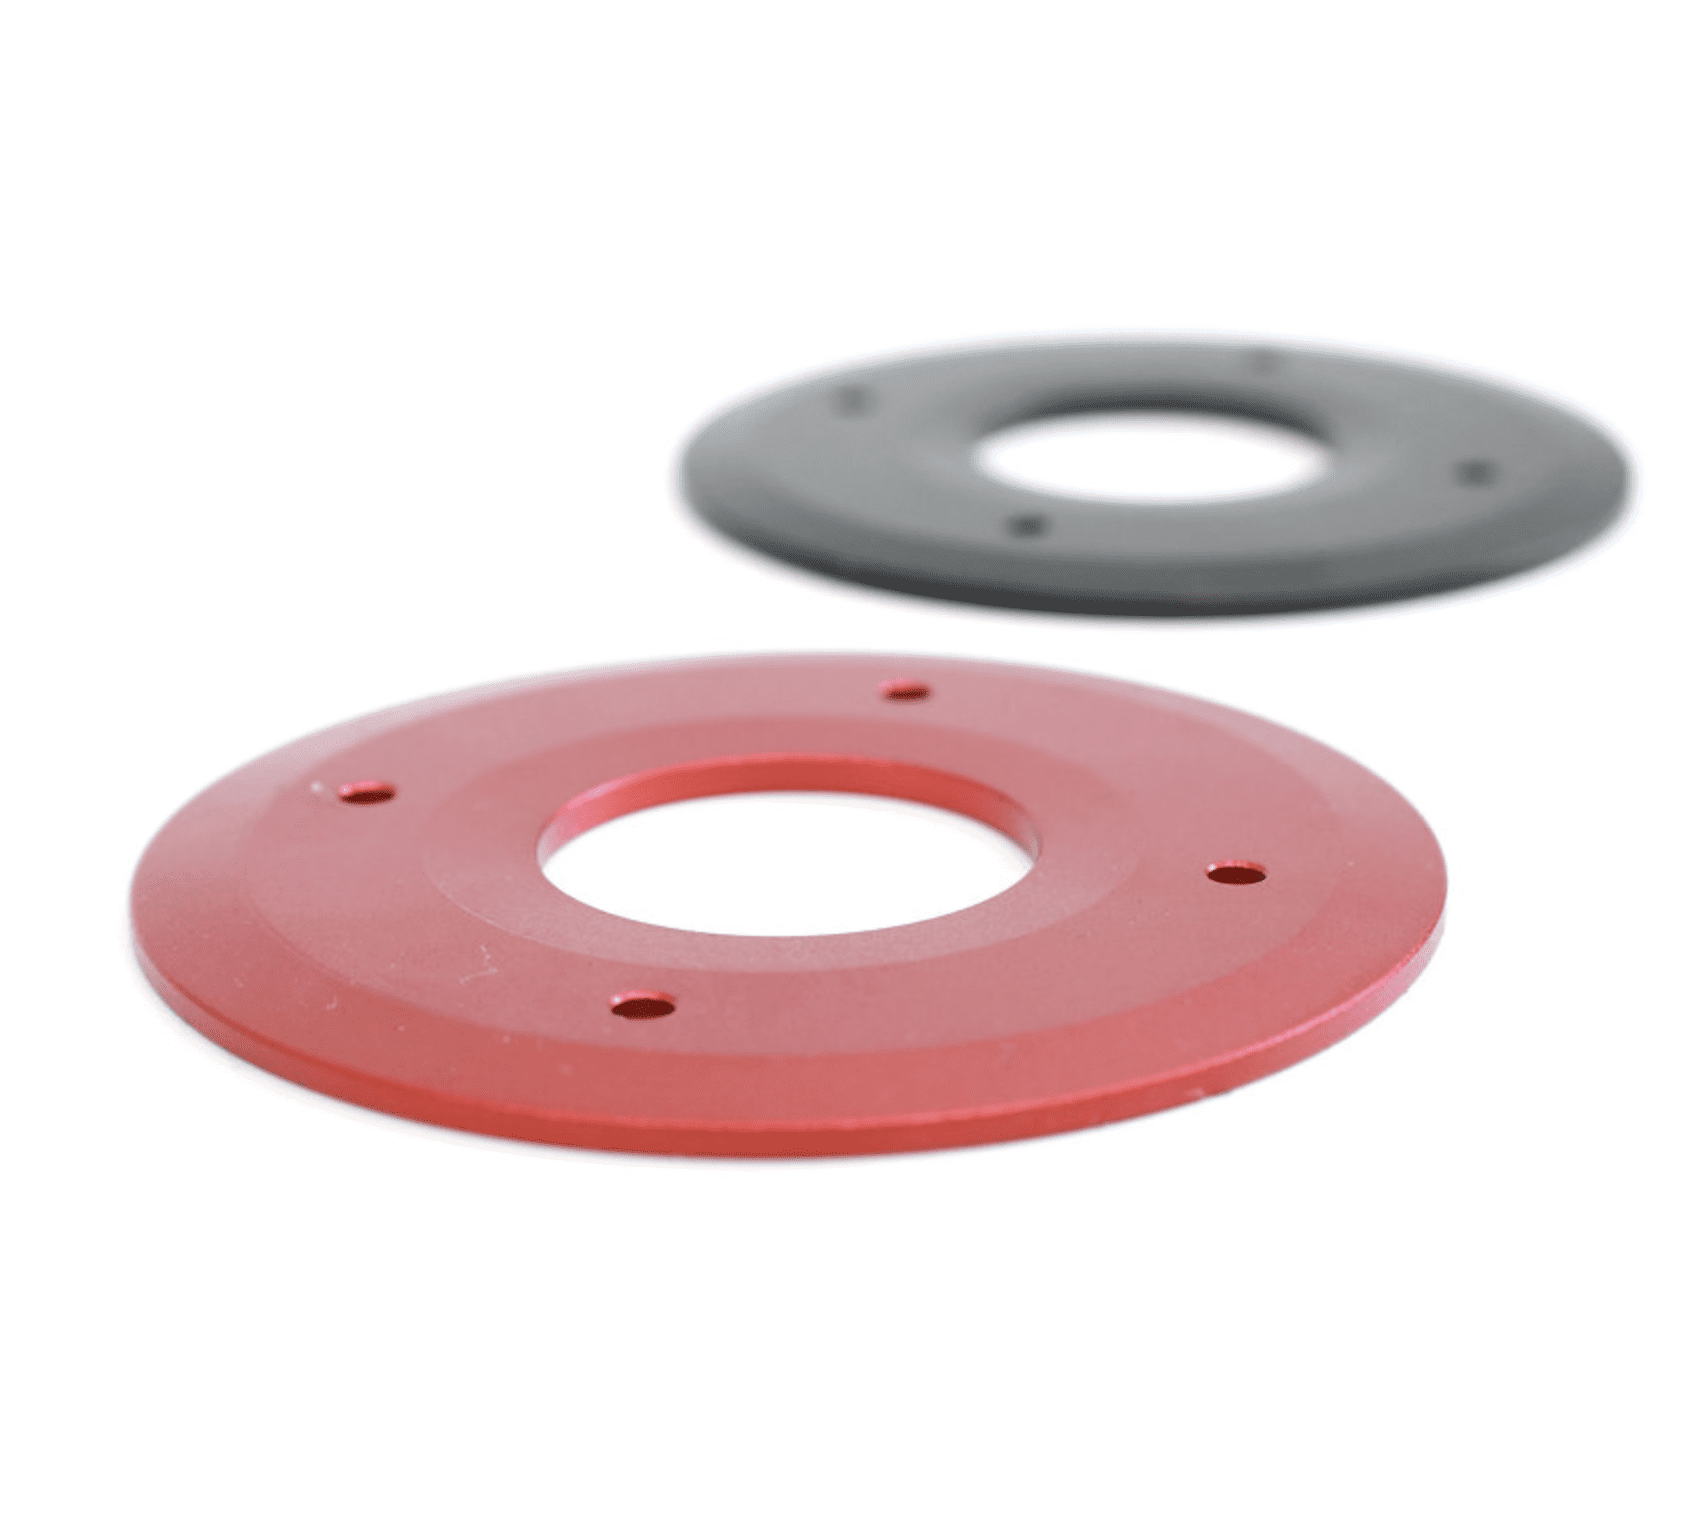 Two red and one gray plastic discs on a white background